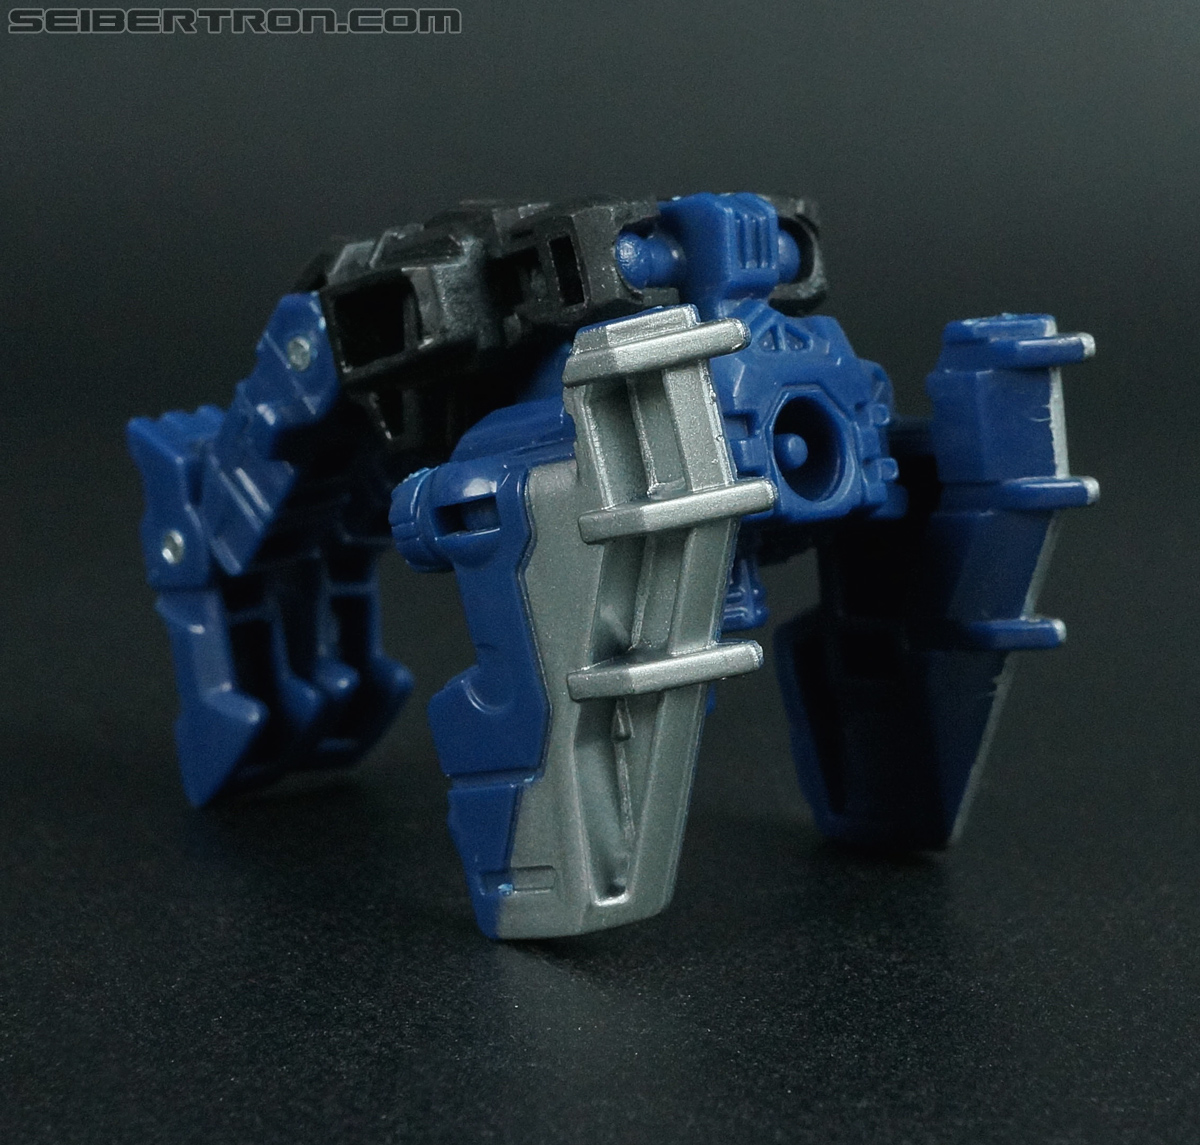 Transformers Arms Micron Blowpipe (Image #7 of 73)